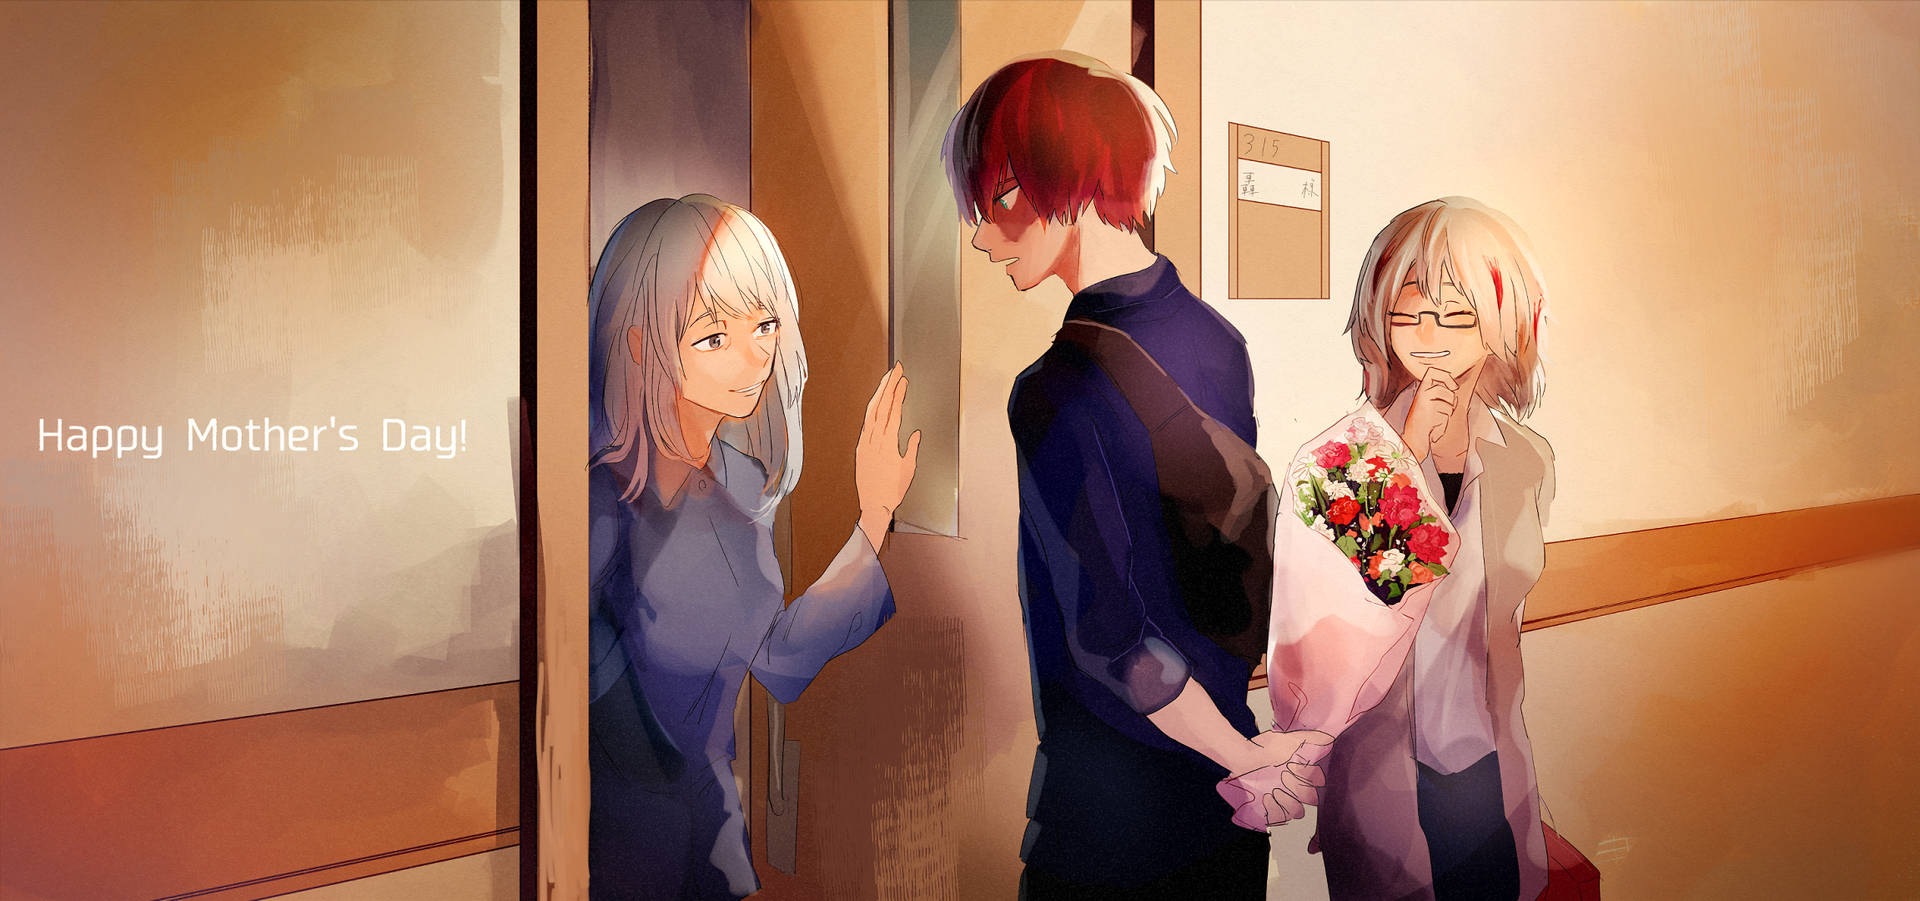 A Touching Moment Of The Todoroki Family Celebrating Mother's Day Background